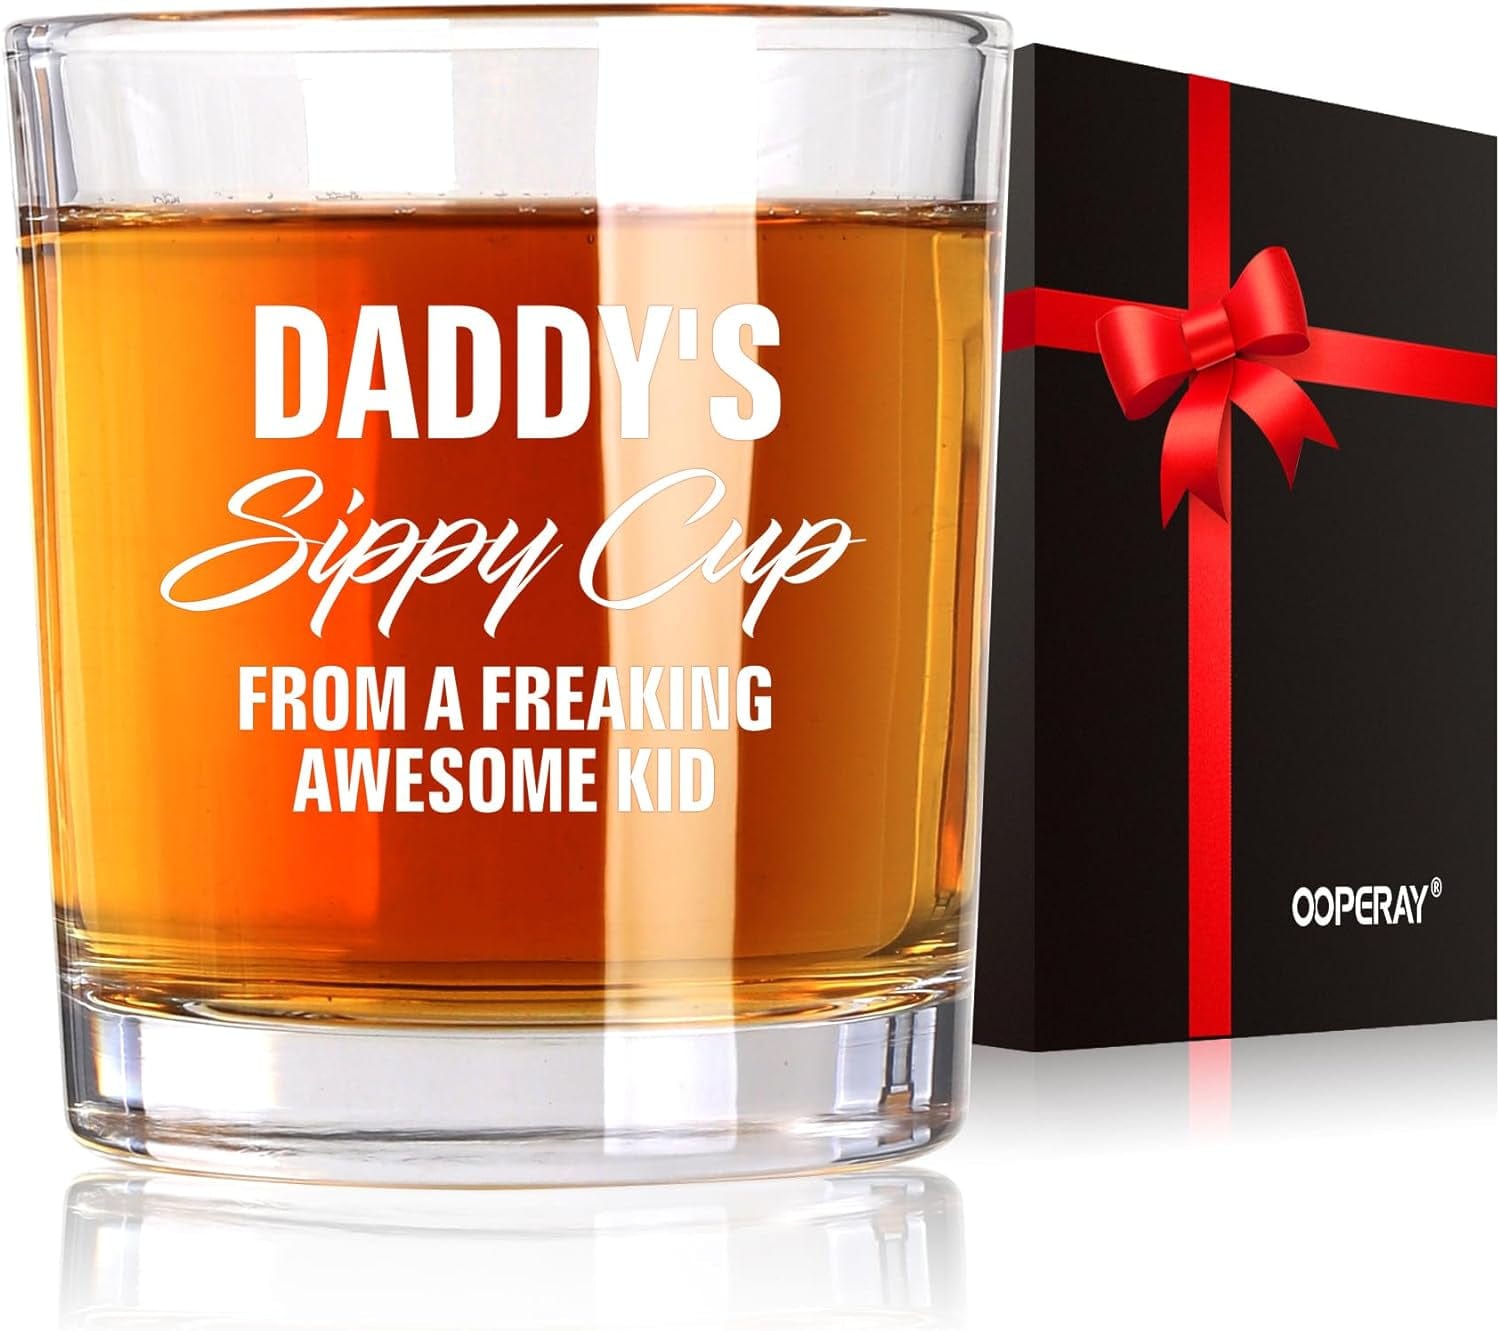 GeckoCustom Fathers Day Dad Gifts, Gifts for Dad on Fathers Day from Daughter Son, Fathers Day Christmas Birthday Gifts for Him Men Husband, Dad Gifts for Fathers Day from Kids, Daddys Sippy Cup Whiskey Glass Engraving Daddy'S Sippy Cup